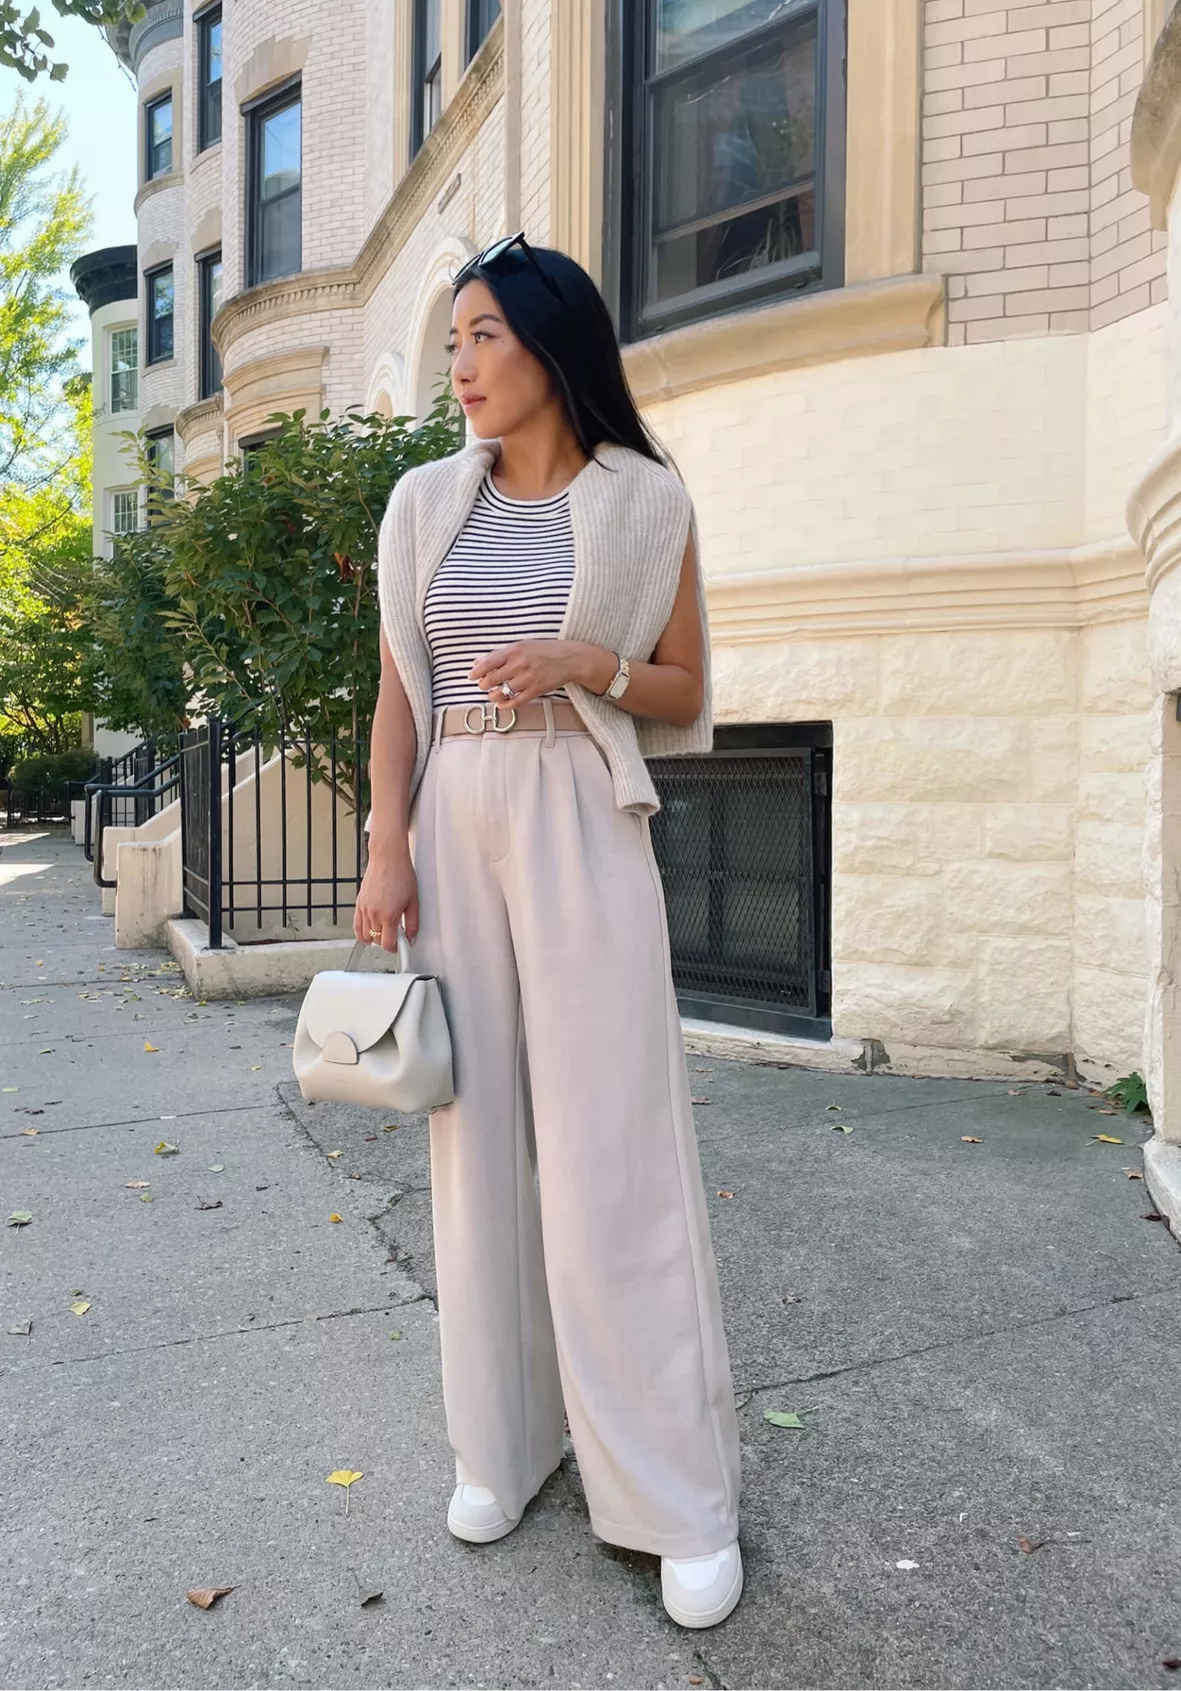 Wondering What Shoes Look Best With Wide Leg Pants? Here's the